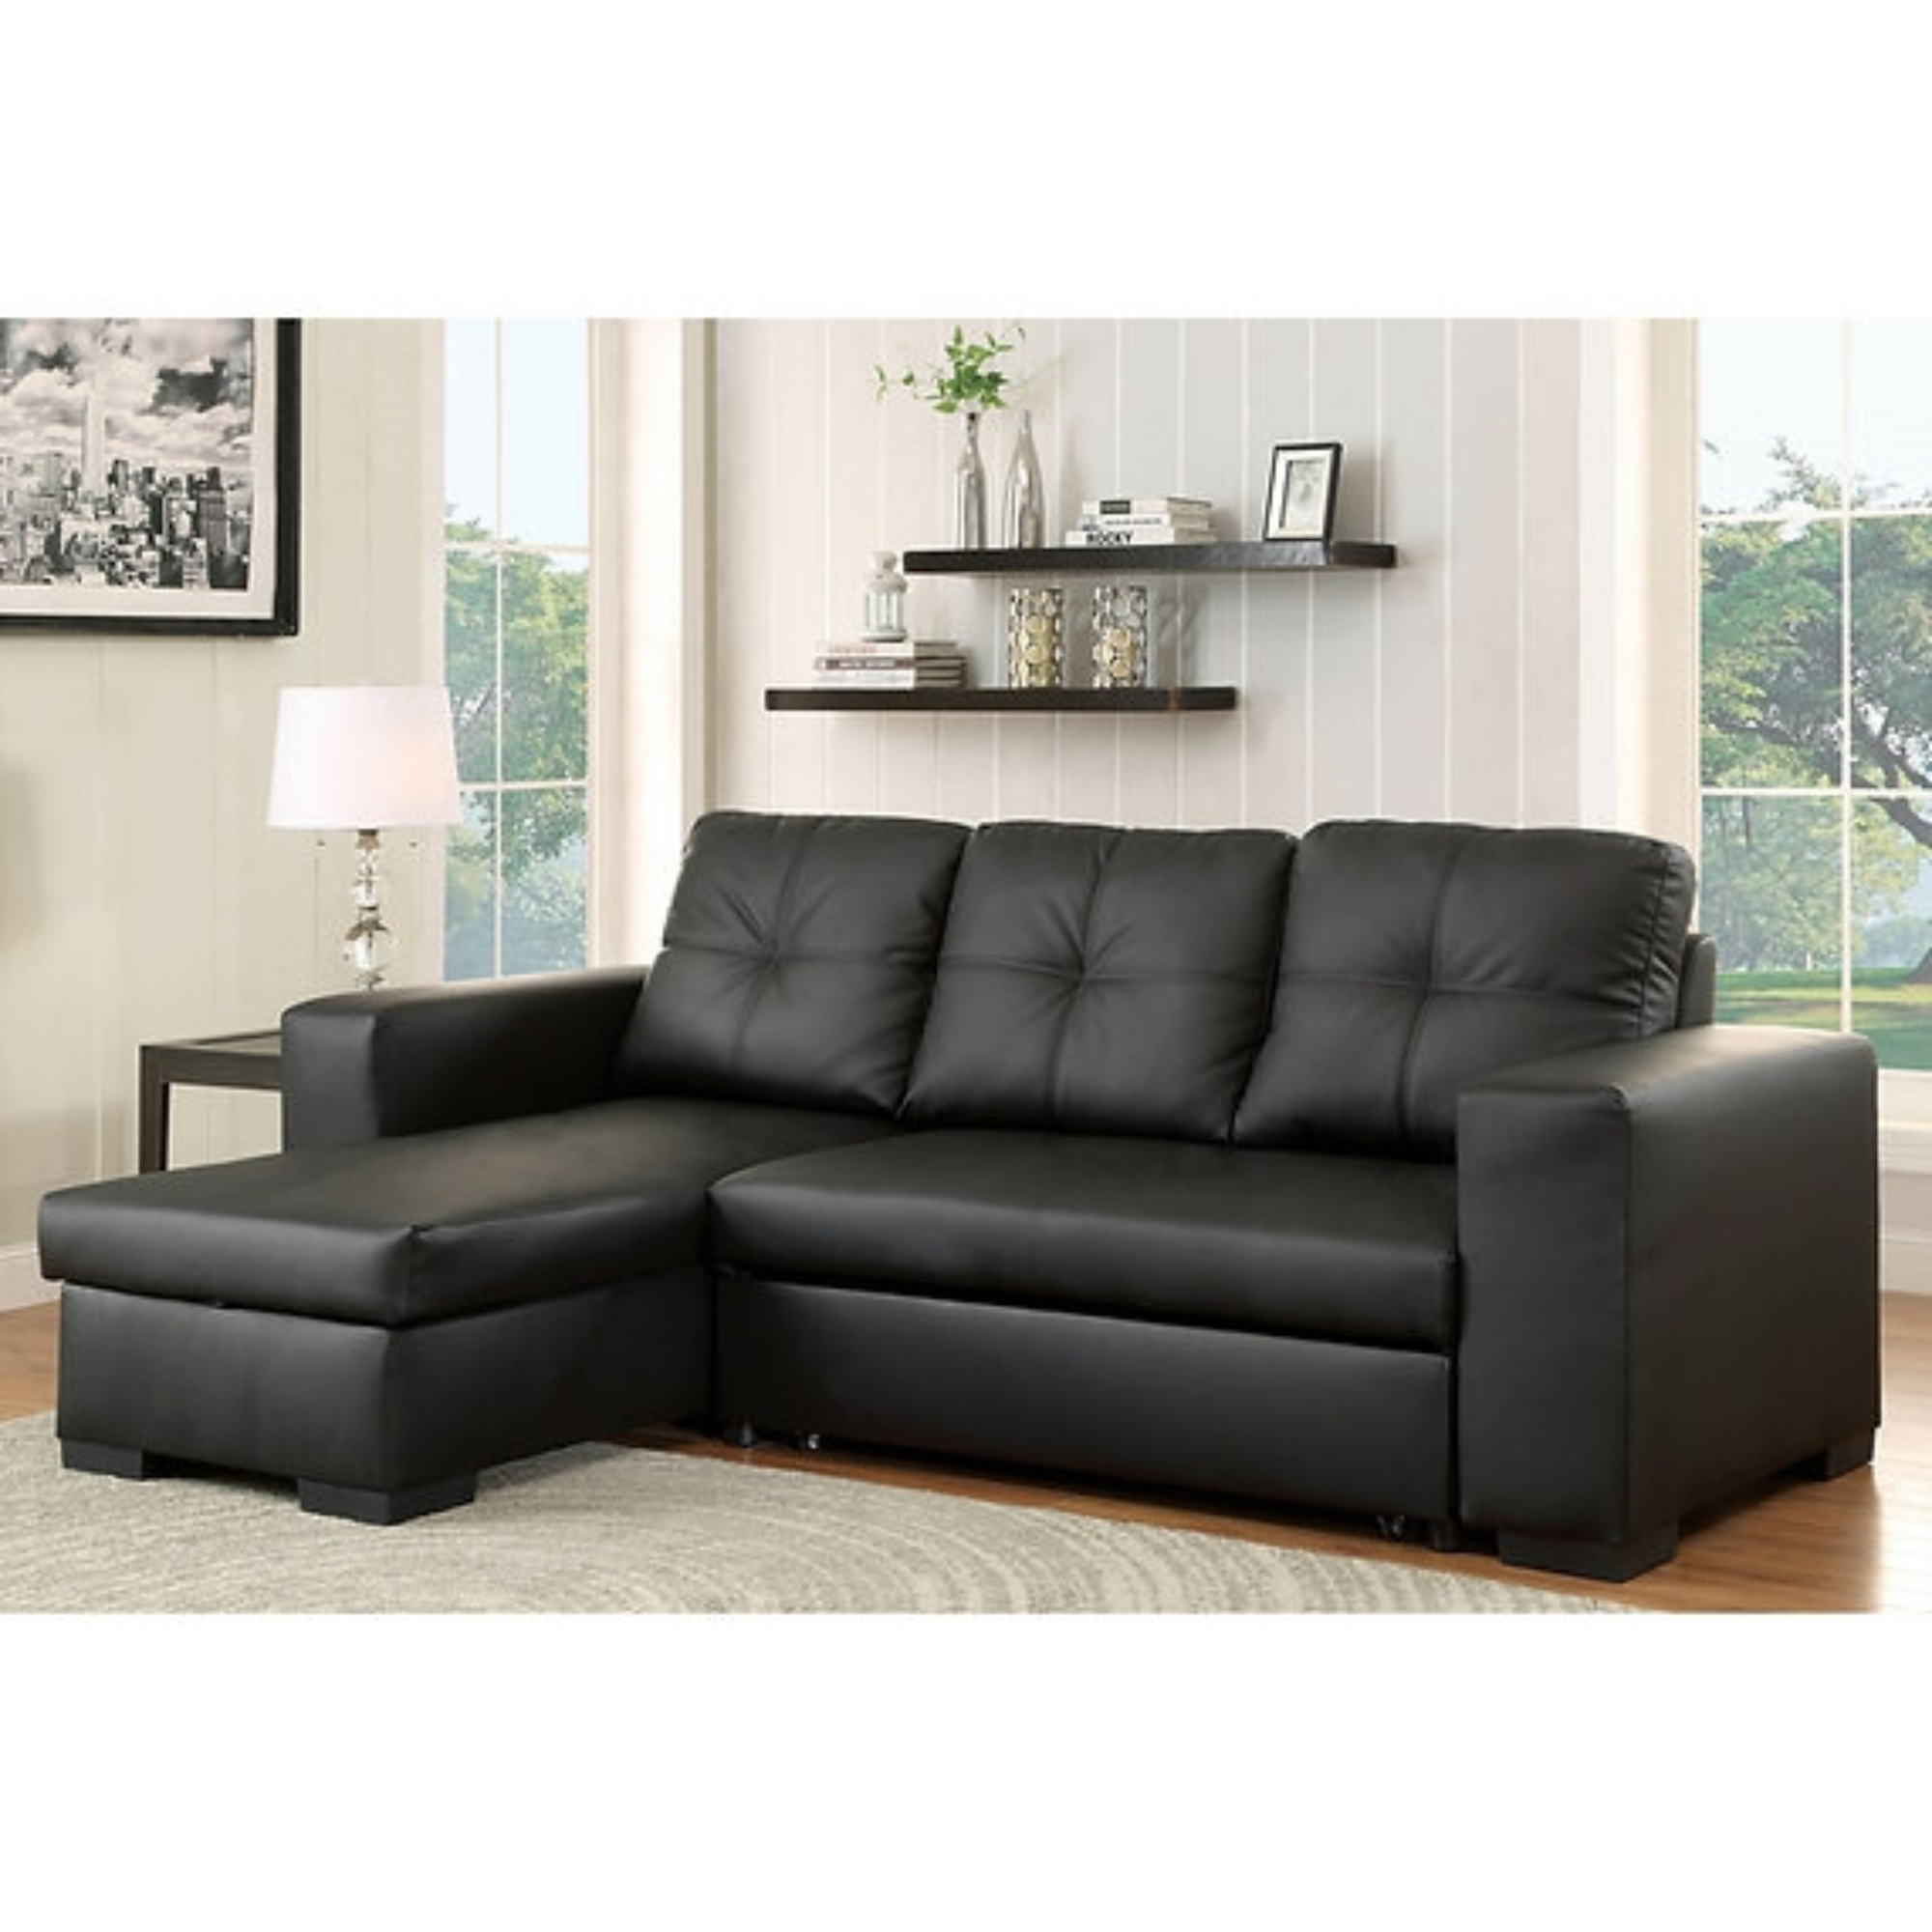 IF-9032 Reversible Chaise Sofa Bed